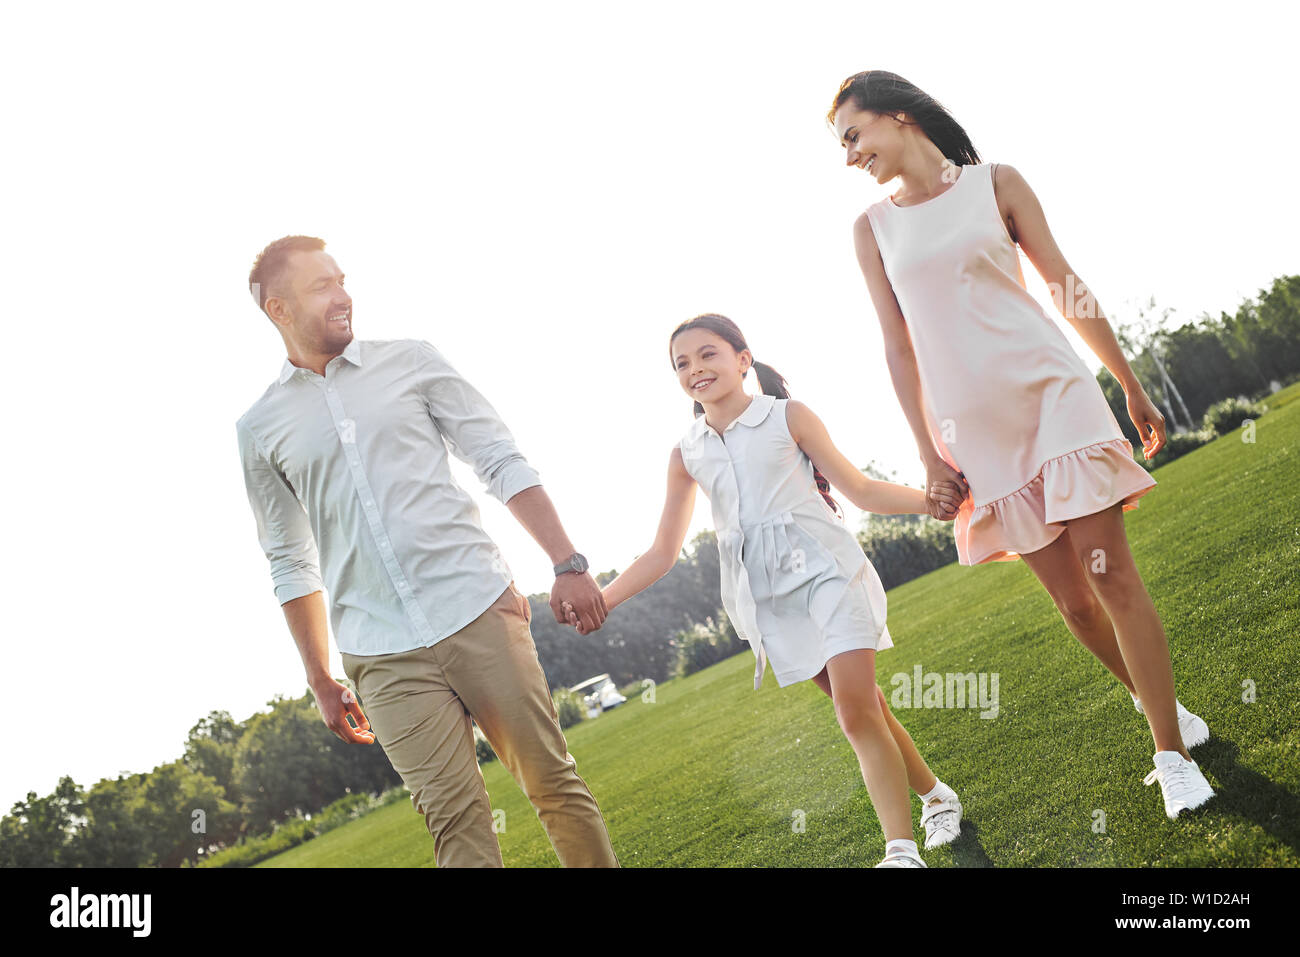 Always happy together. Full length of little happy girl walking with her parents in the park and smiling. Family concept Stock Photo